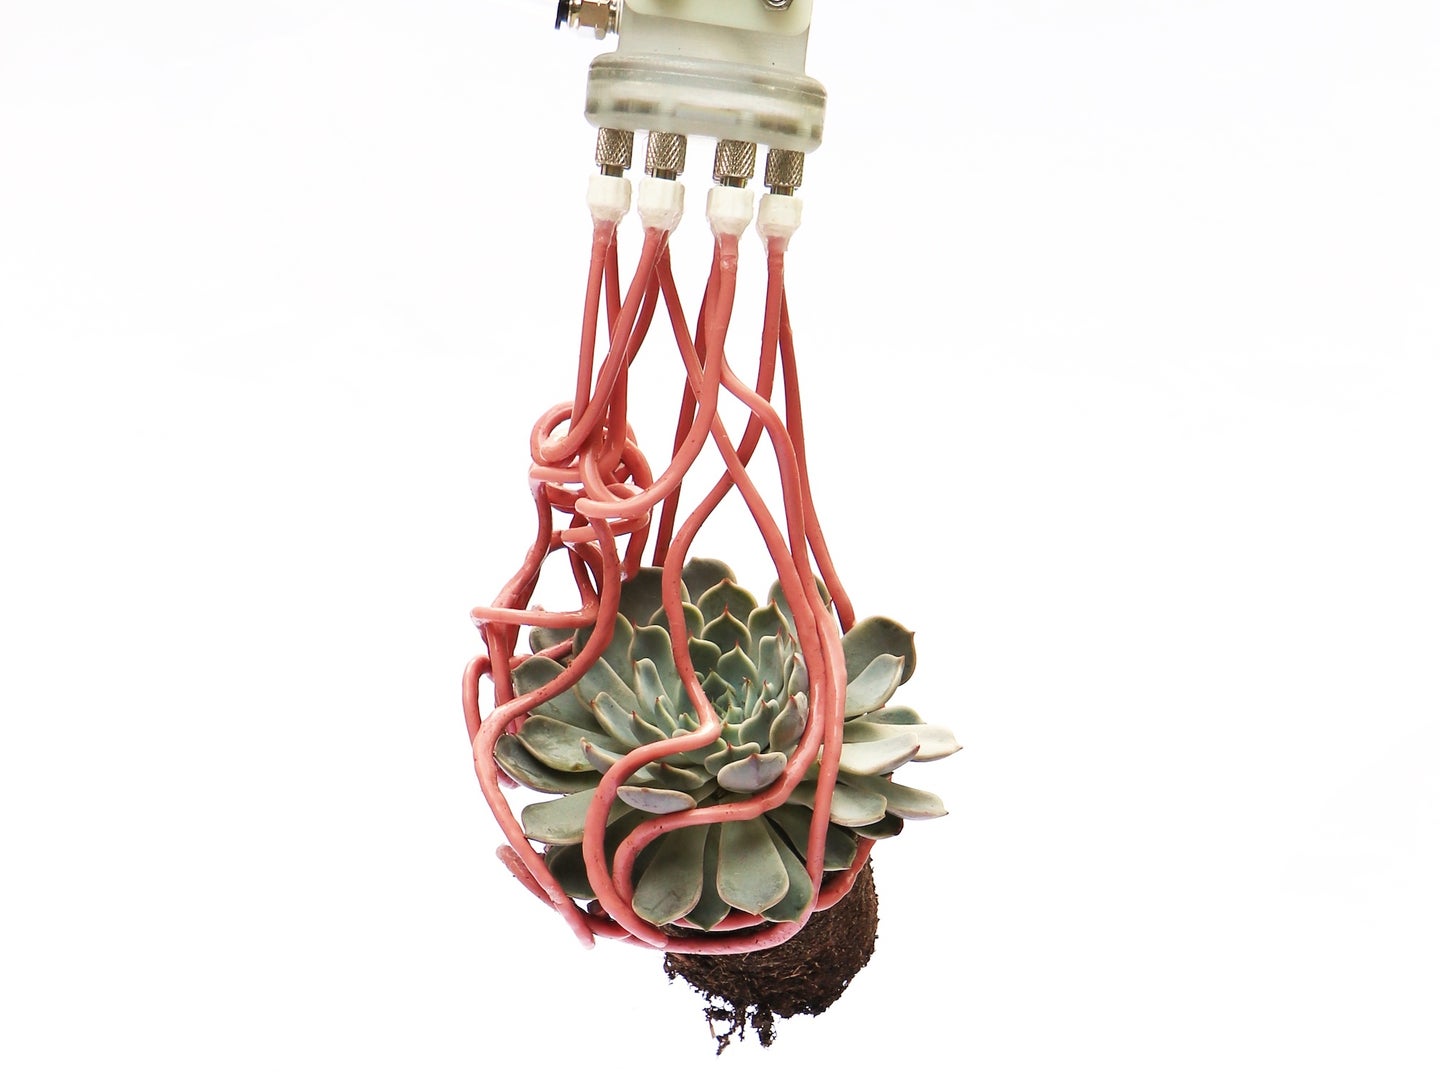 Harvard robotic arm with tentacle filaments gripping succulent plant